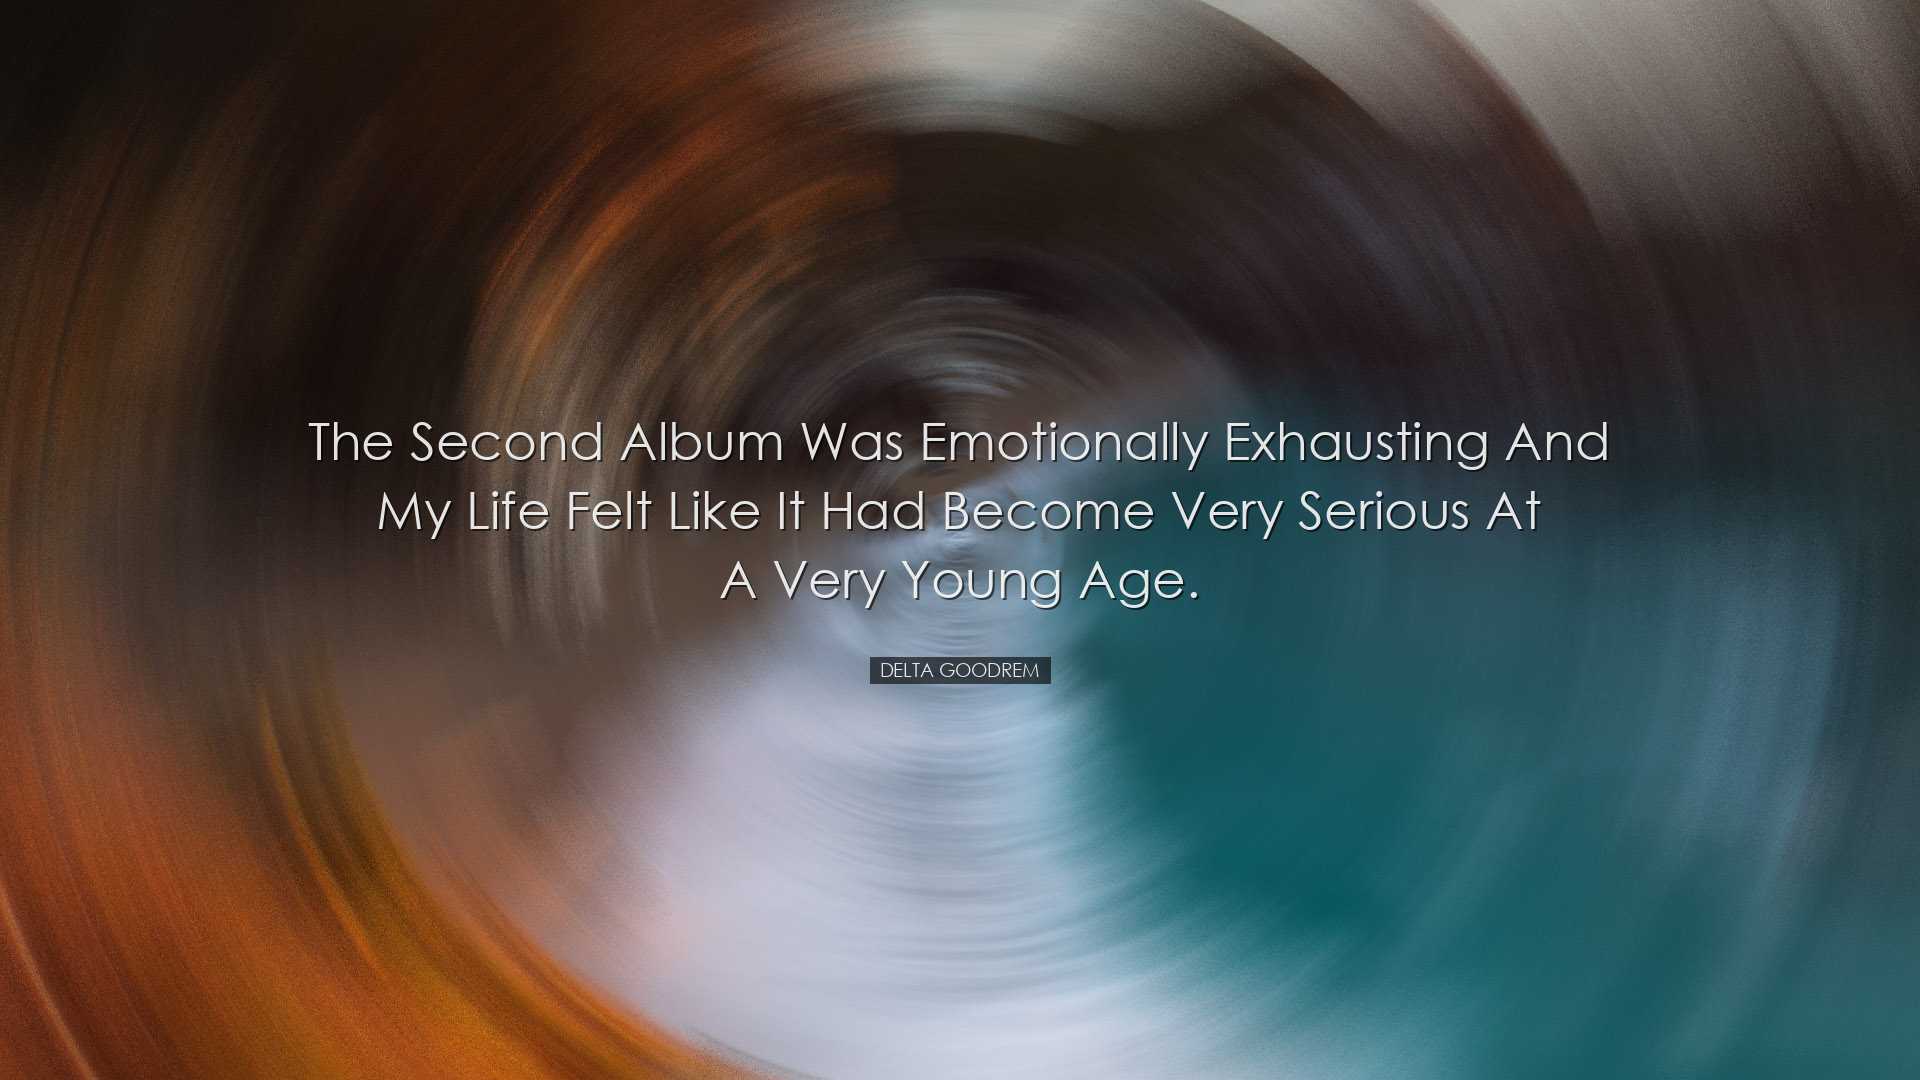 The second album was emotionally exhausting and my life felt like